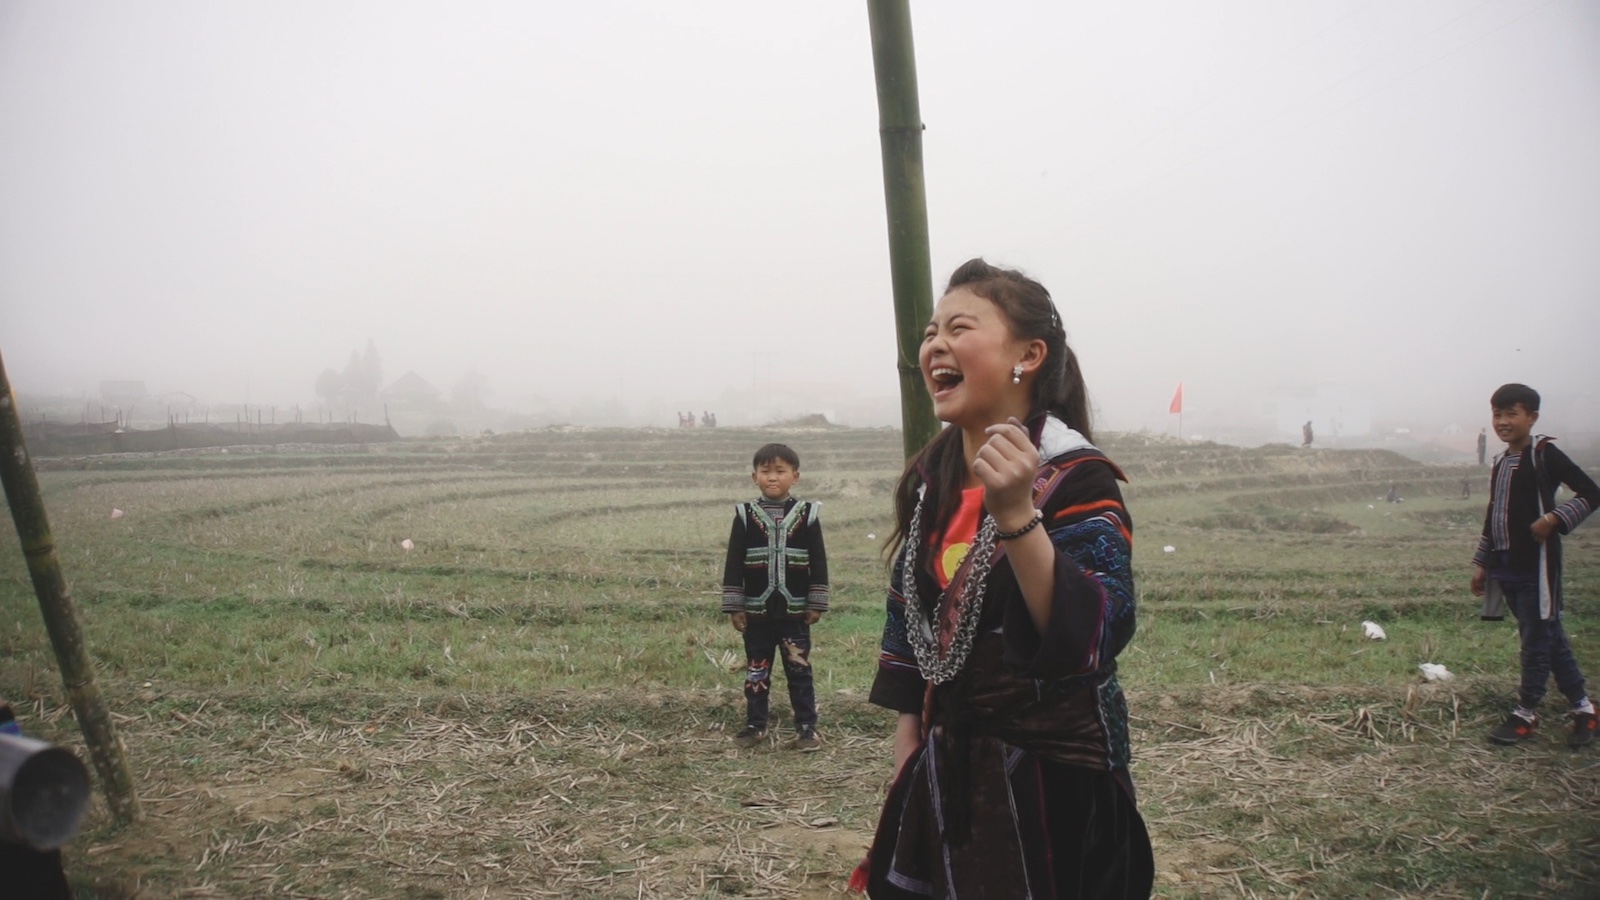 A young girl stands in a misty field and laughs joyously, with two younger boys in the background